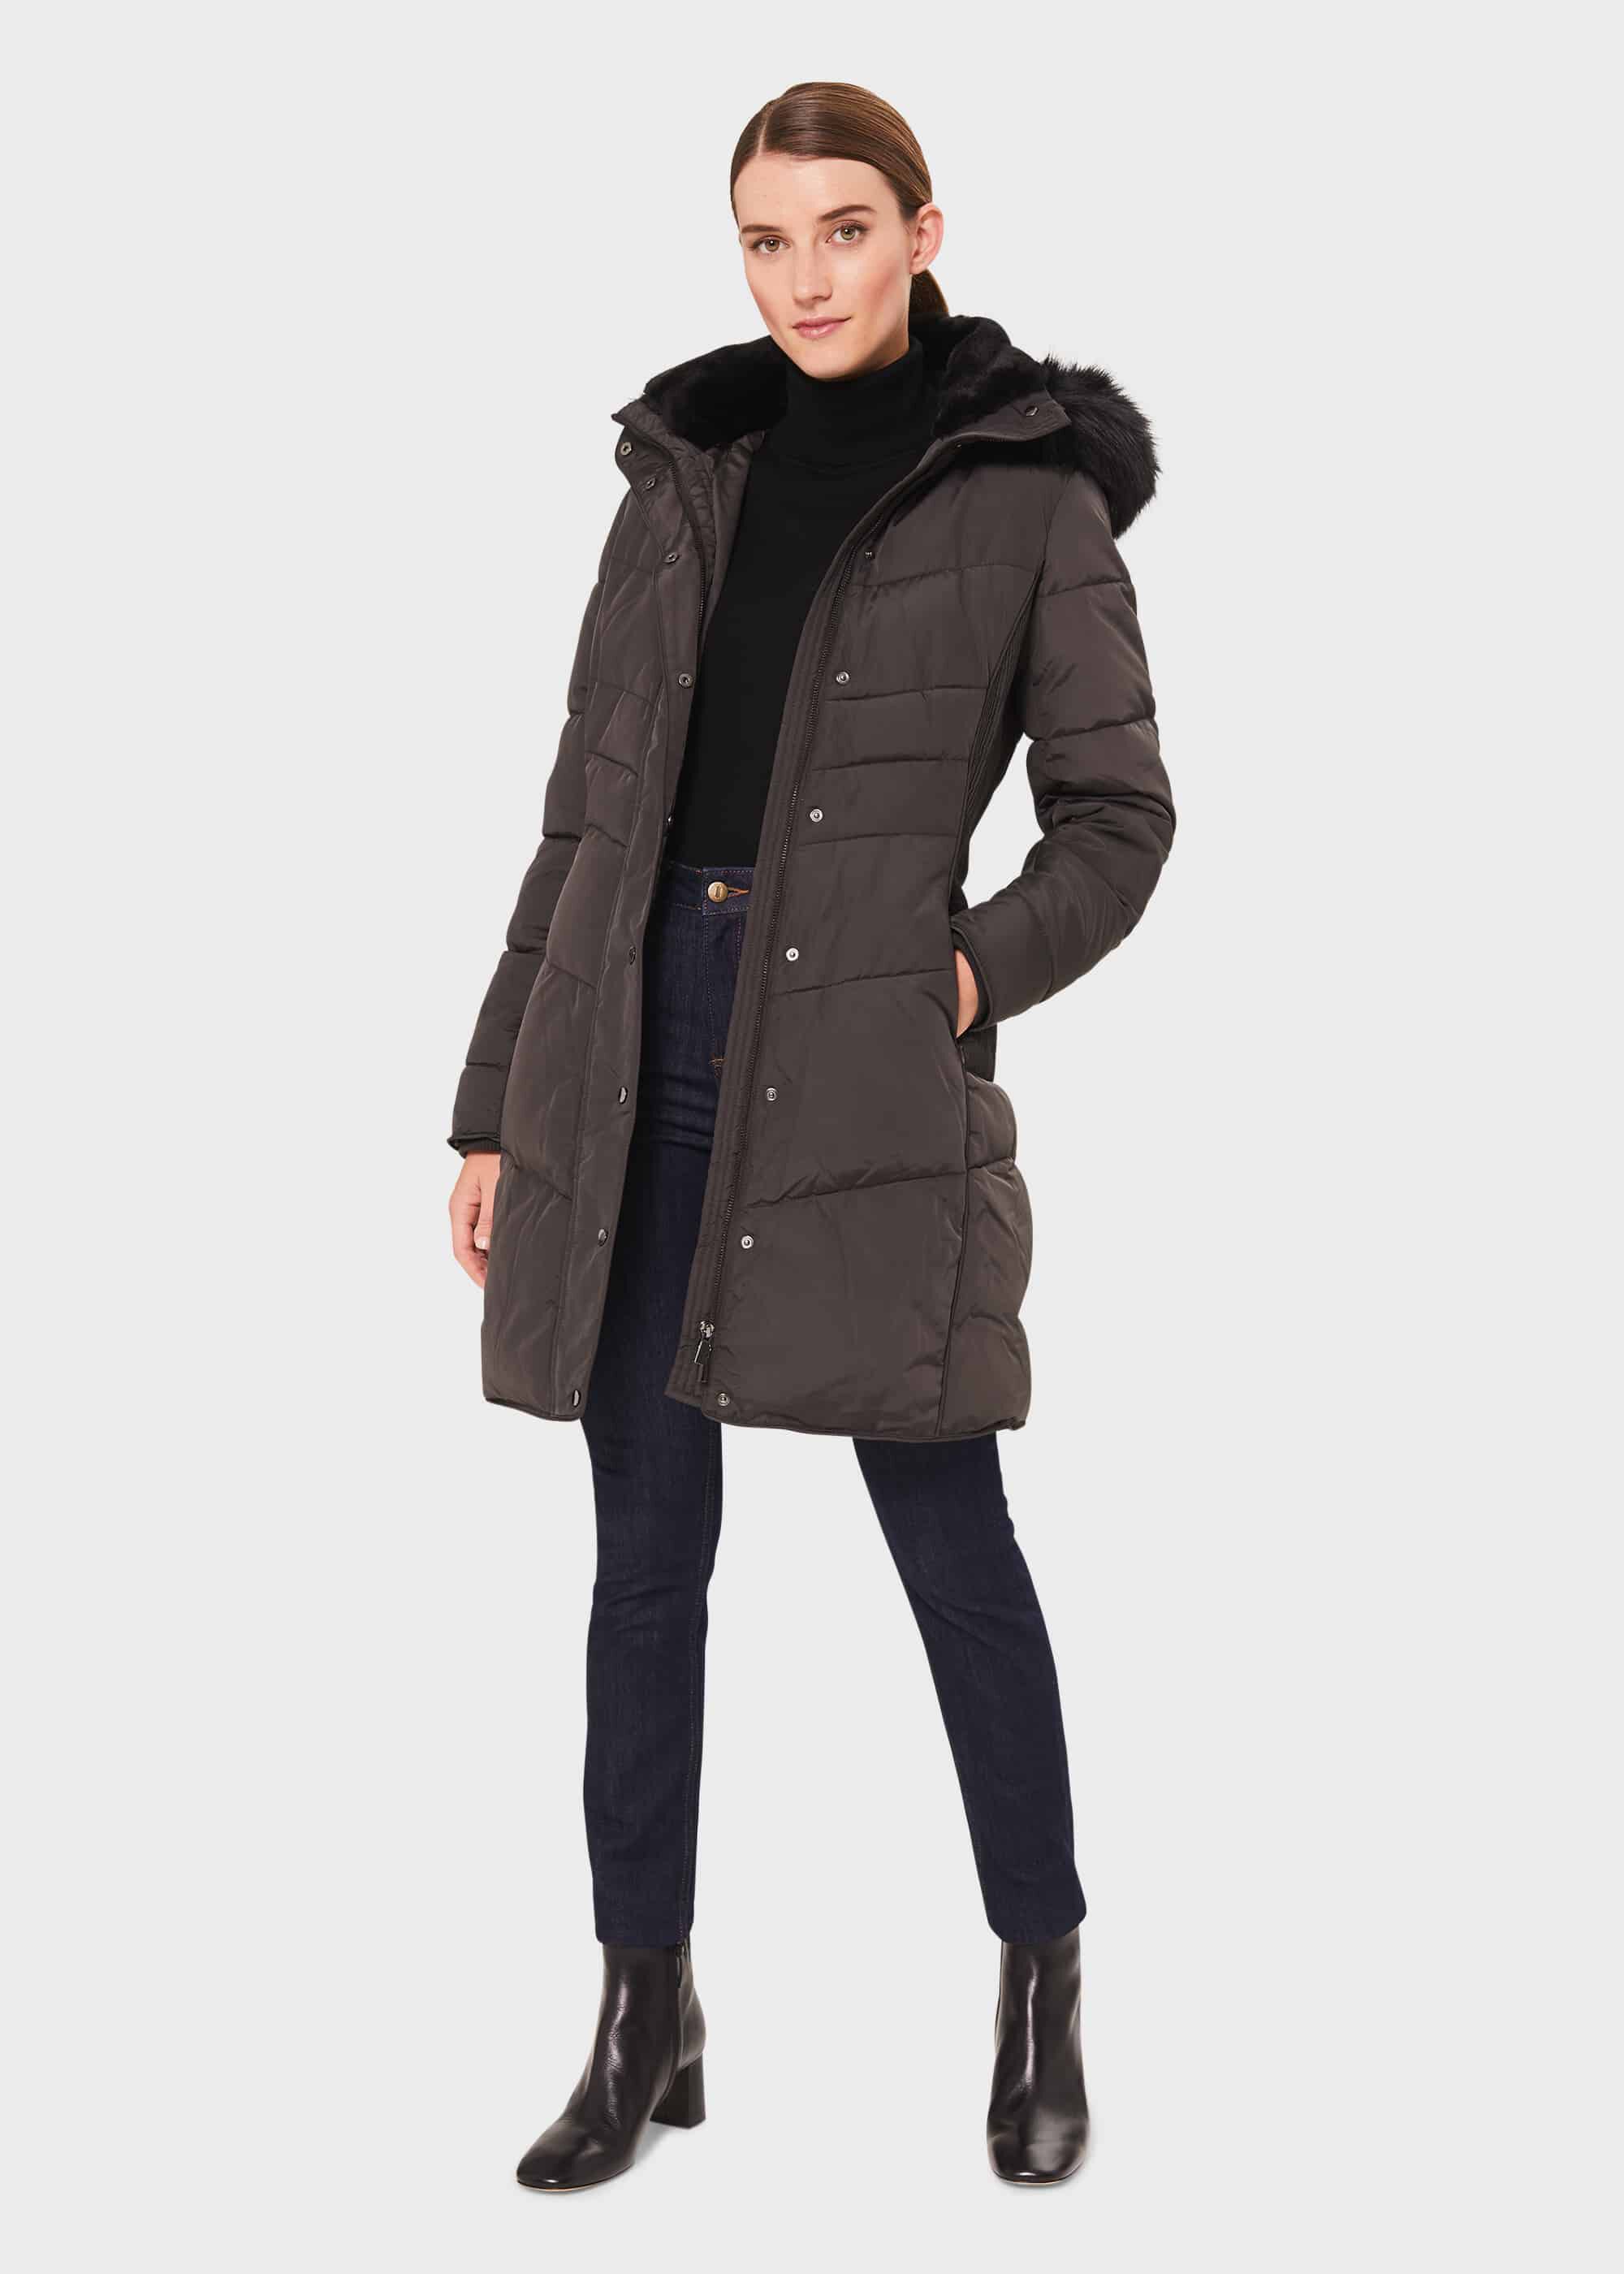 BCBGeneration Womens Charcoal Gray A-Line Coat